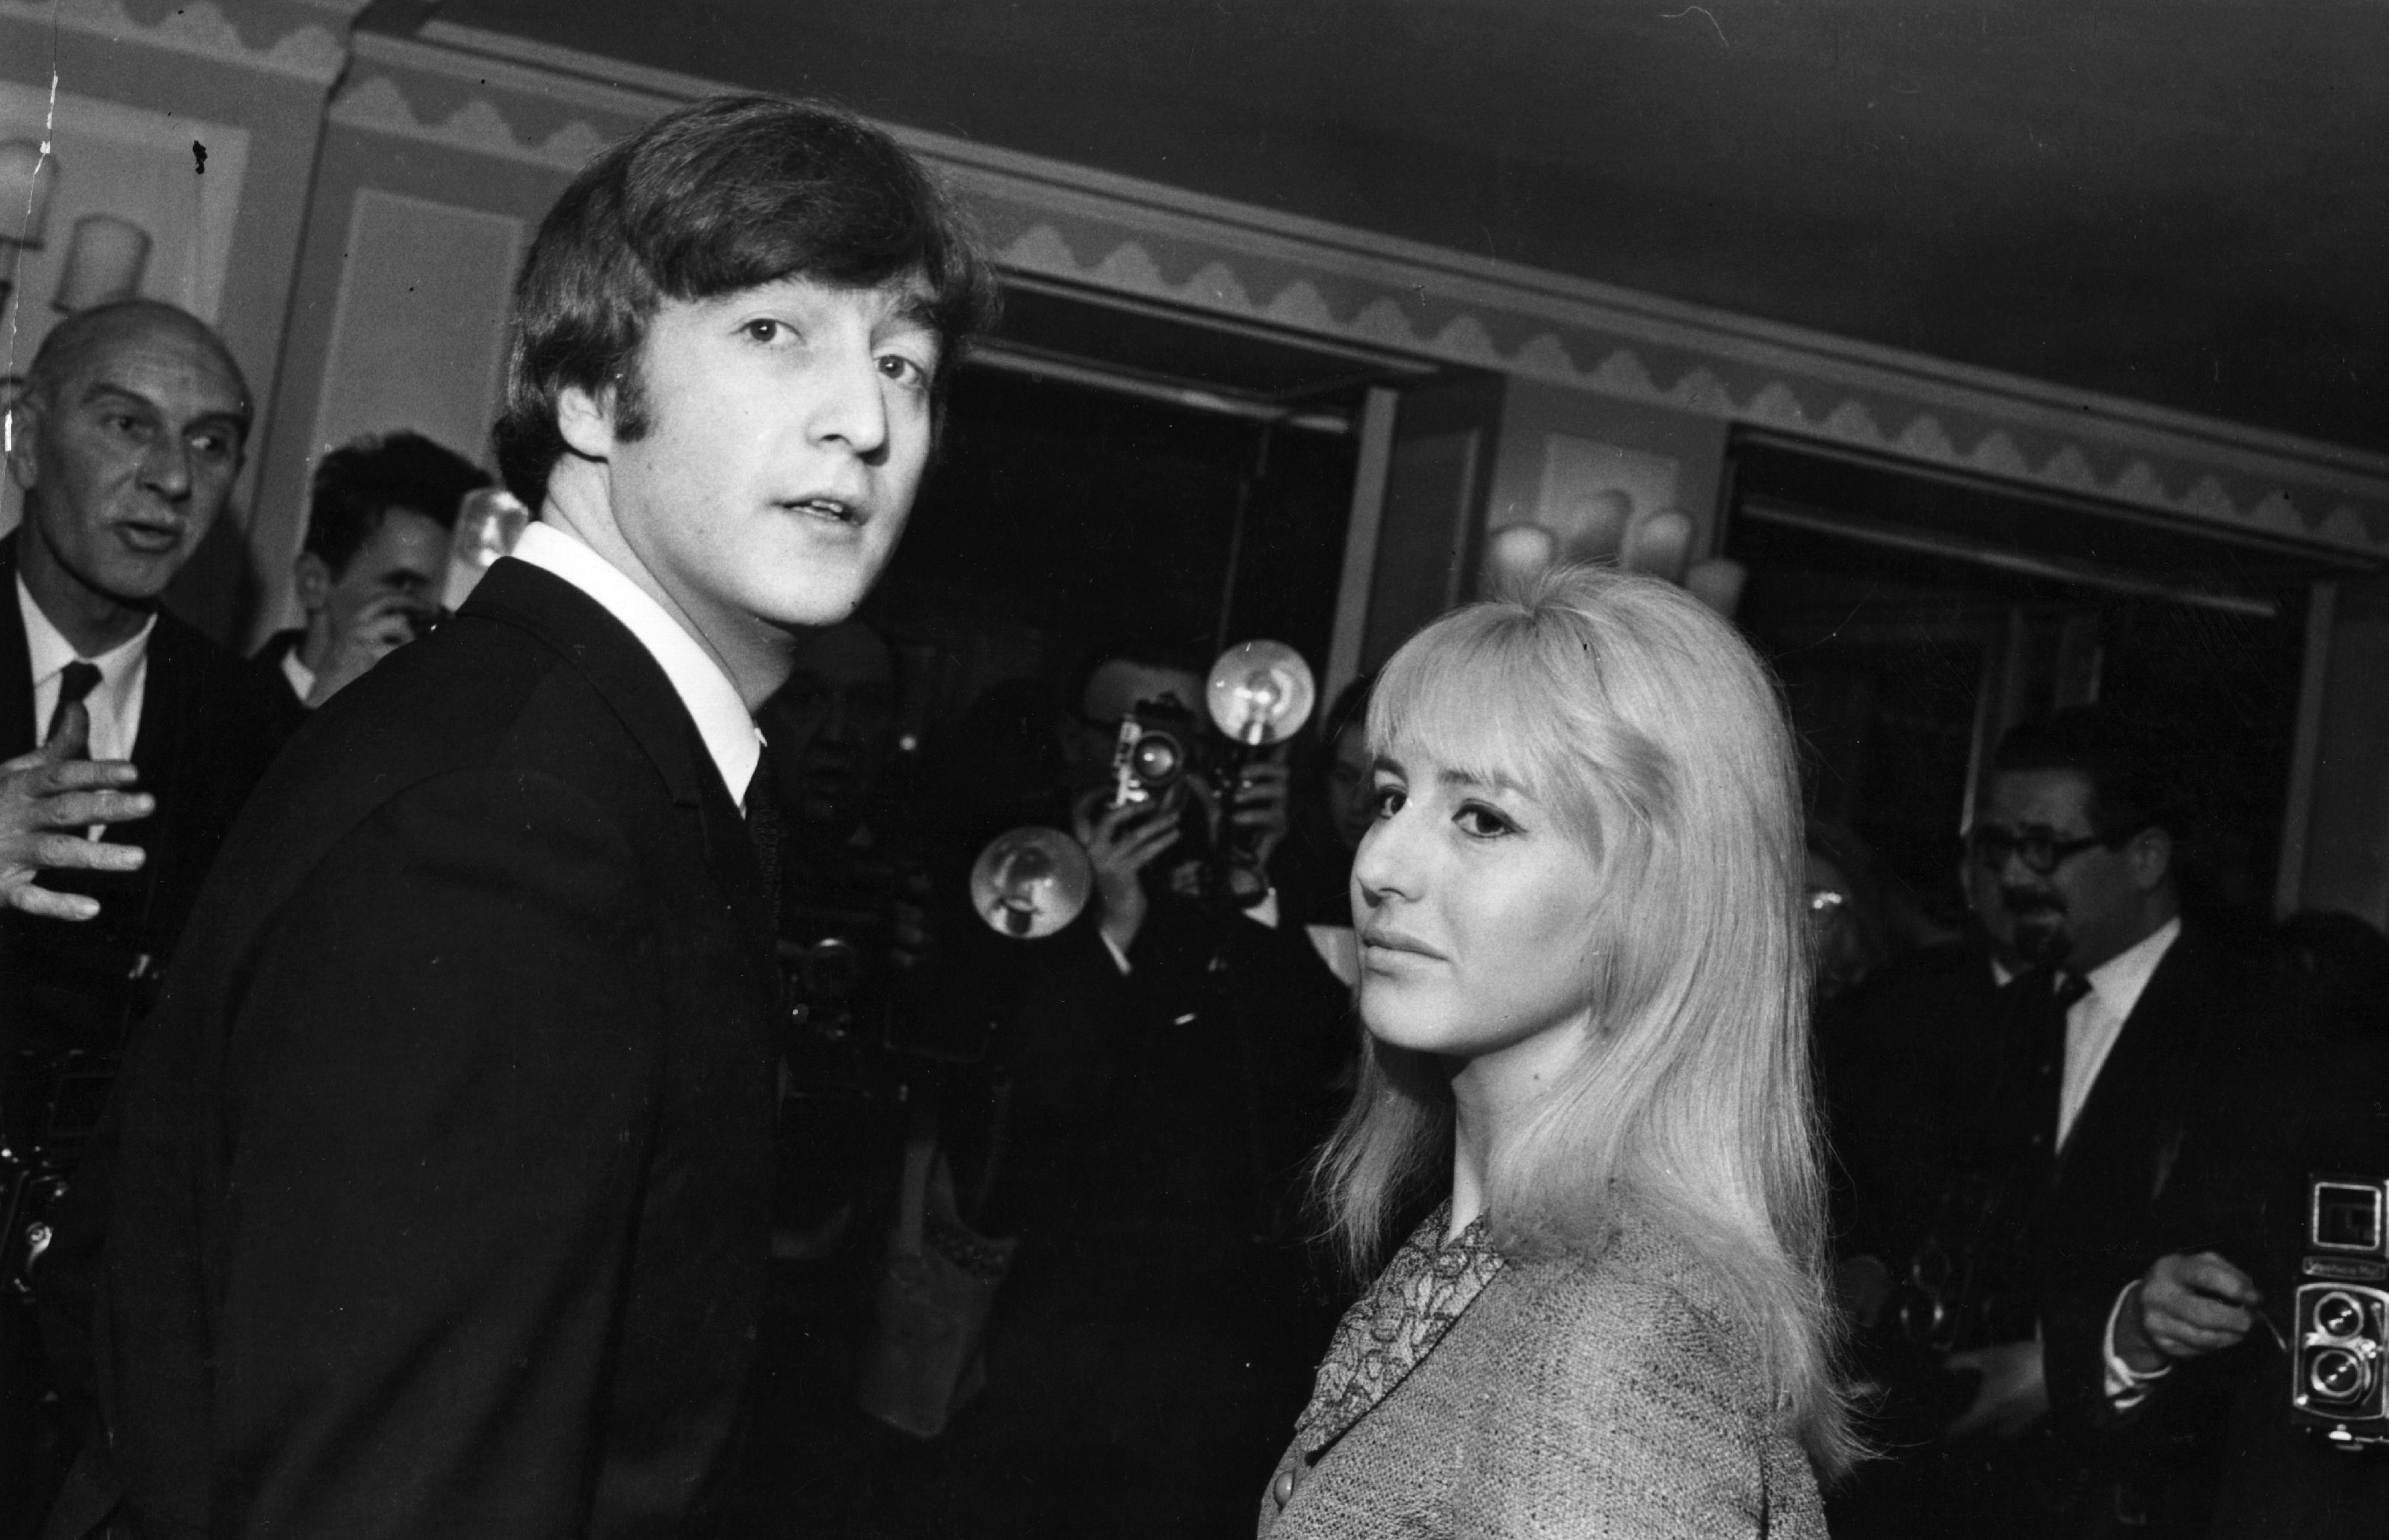 John Lennon (1940 - 1980) of The Beatles, with his wife Cynthia at the Dorchester Hotel, London, for 'In His Own Write'